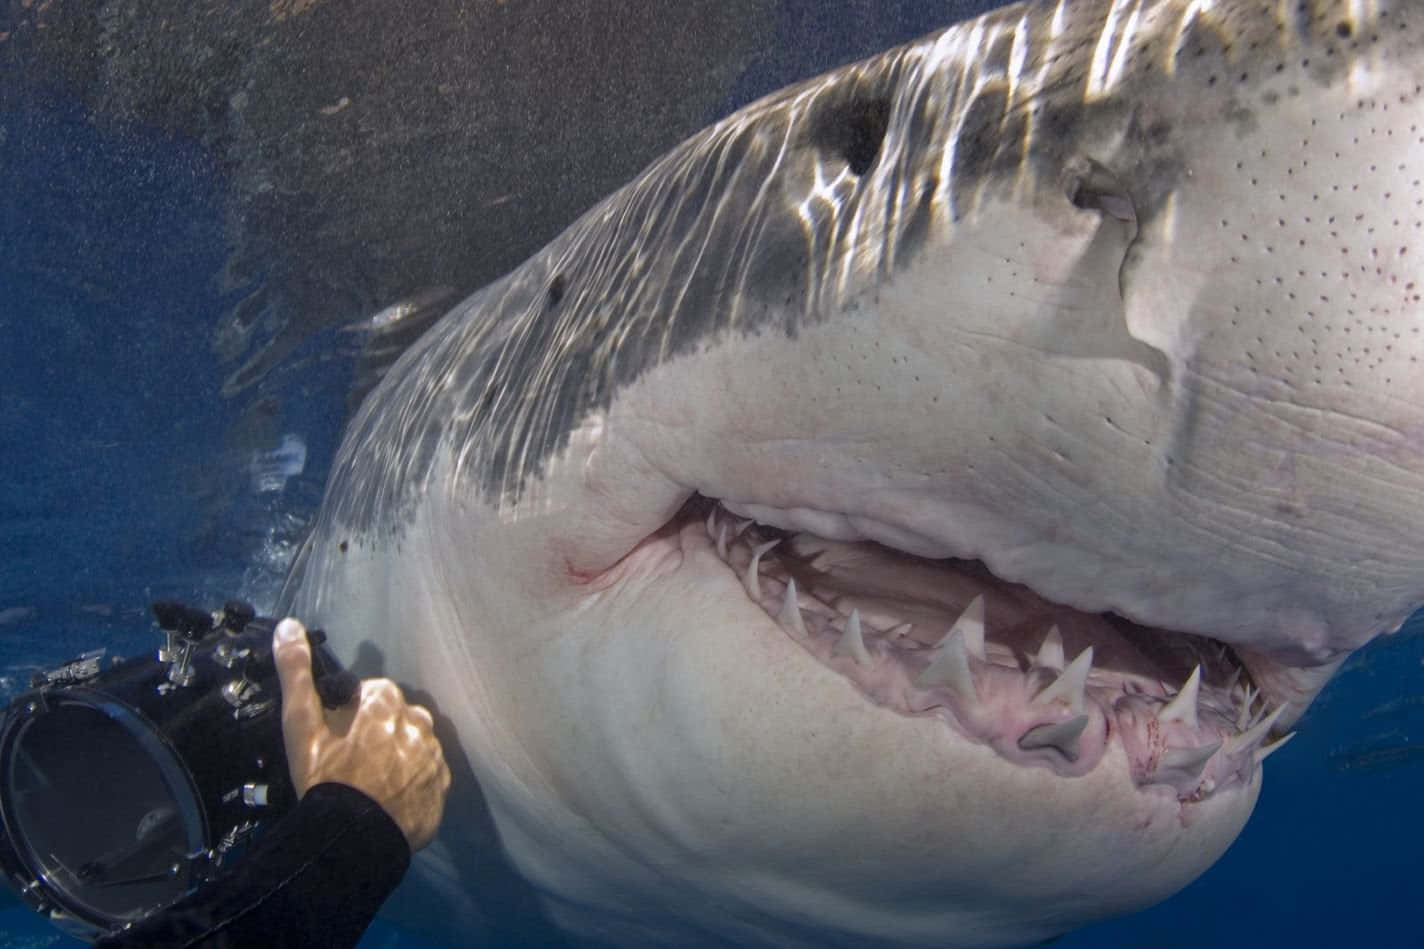 A menacing Great White Shark lurks in the depths of the ocean